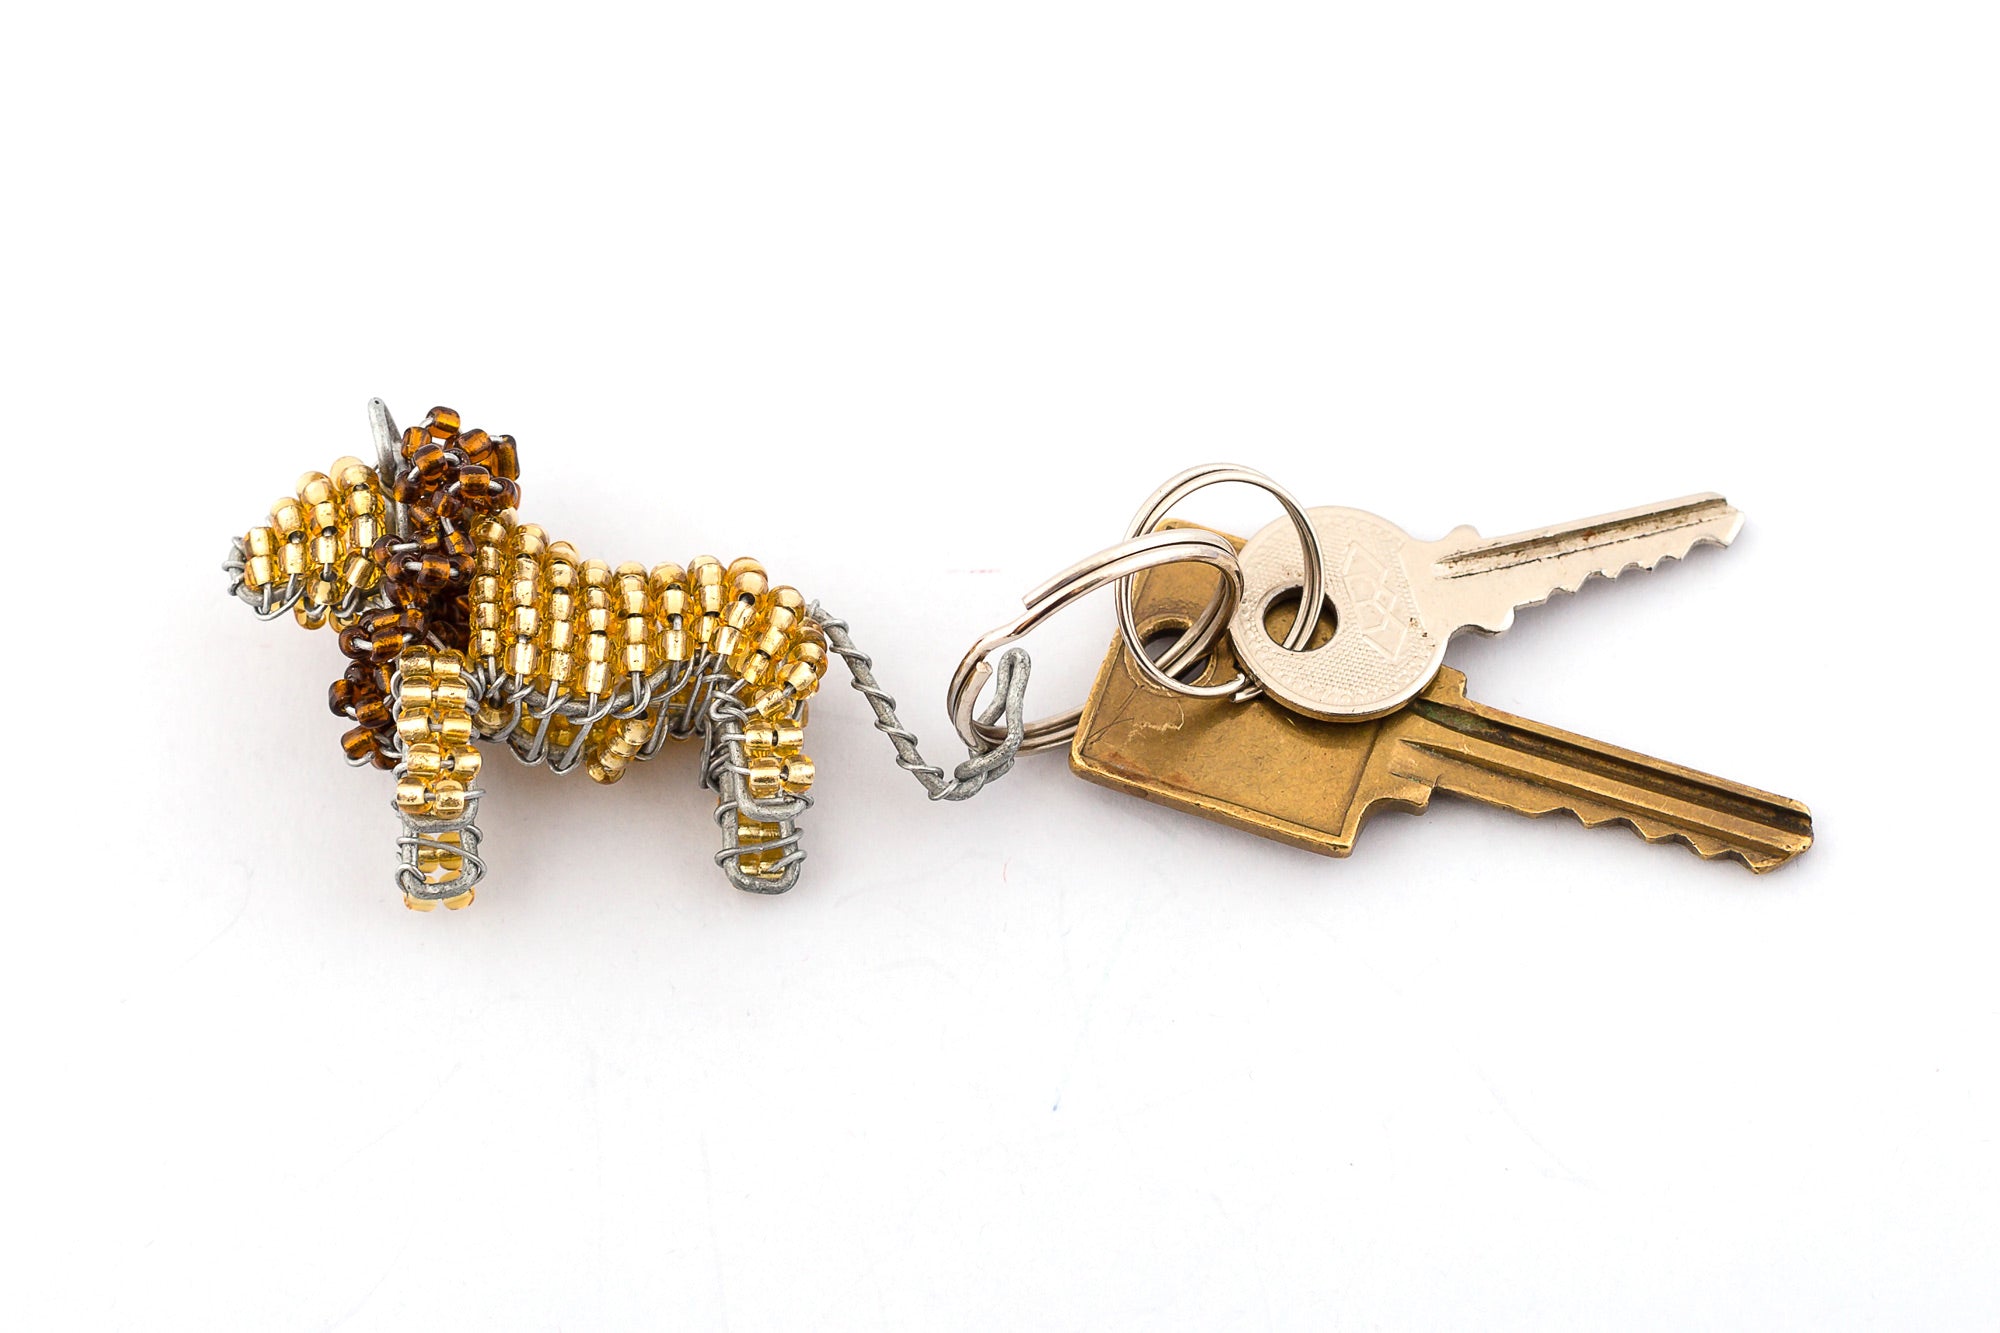 Beaded lion key chain. Handmade in golden beads with a dark brown mane.  Good protector of keys! Fair trade products.